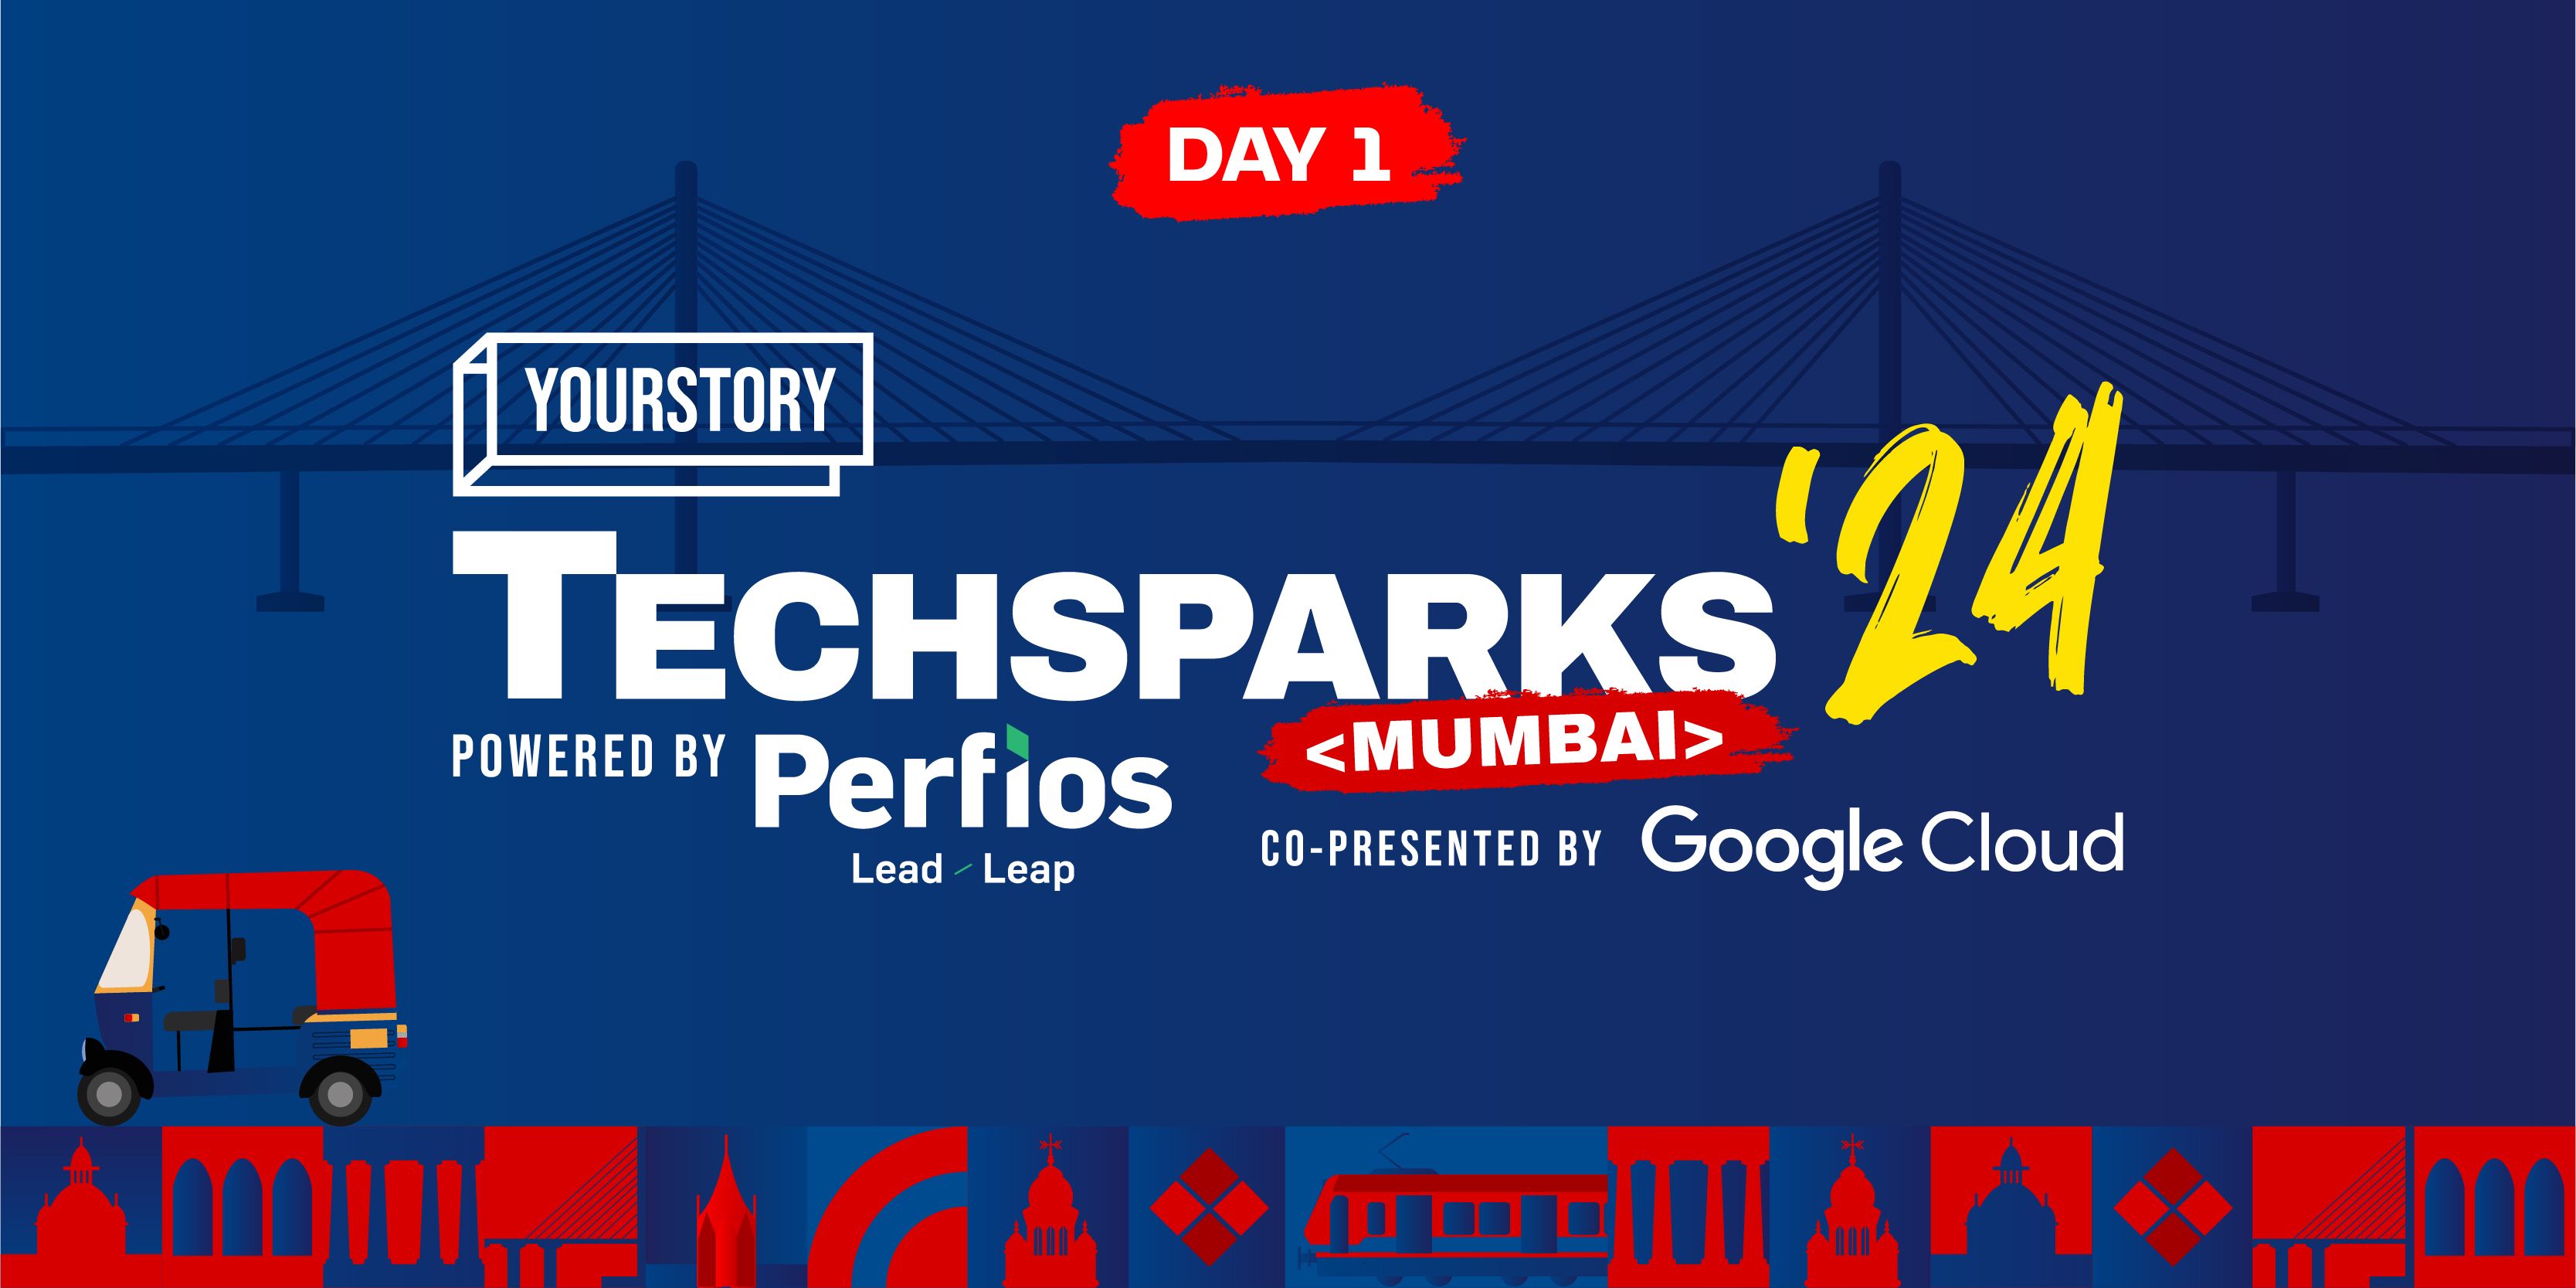 Gaming, fitness and AI: Here’s everything that happened on Day 1 of TechSparks Mumbai
